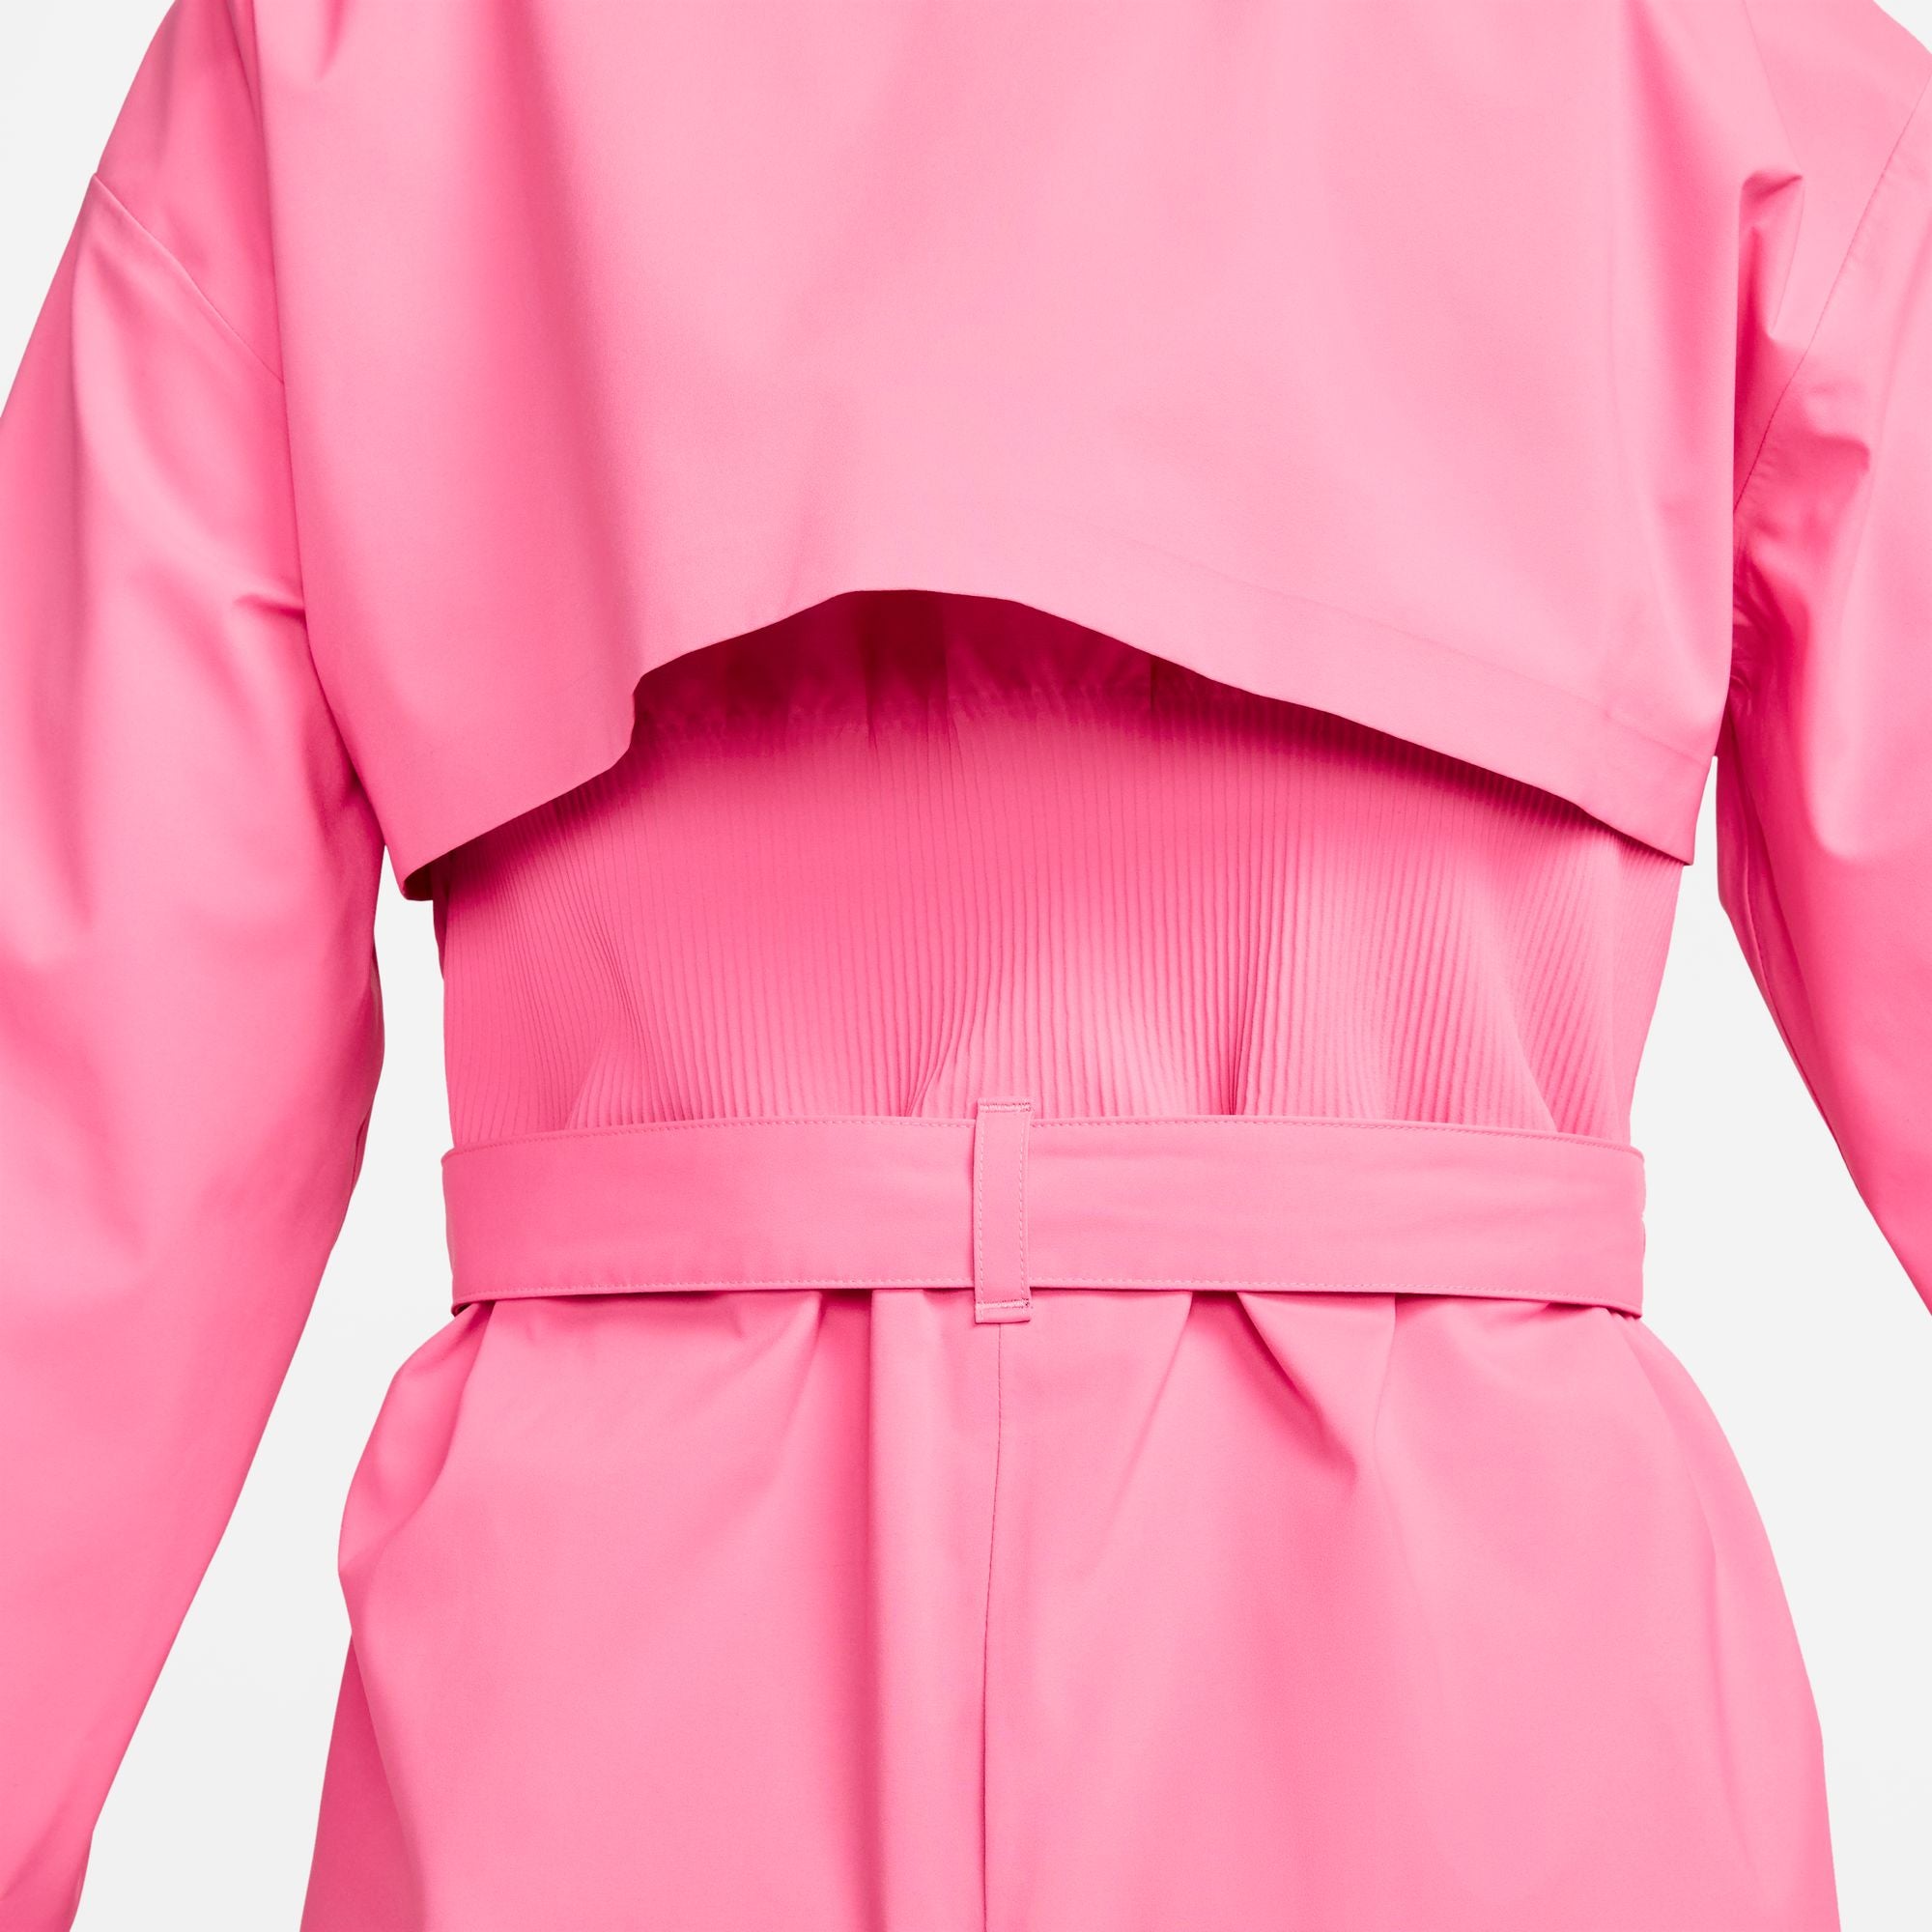 NSW Storm-FIT ADV Tech Pack Trench Coat - Pink Glow/Dark Pony/Pinksicle